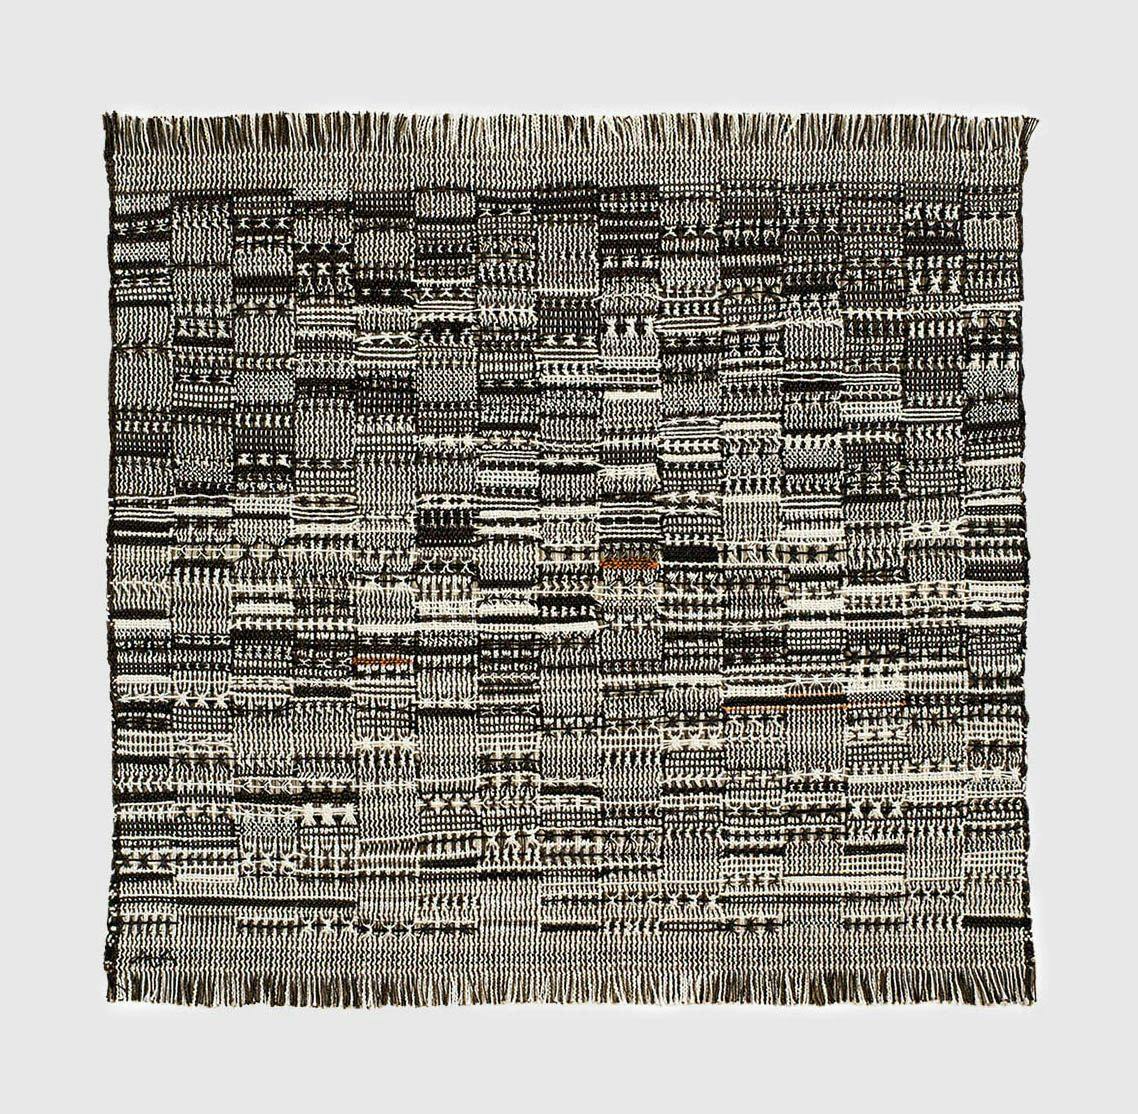 A textile by Anni Albers titled Open Letter, dated 1958.